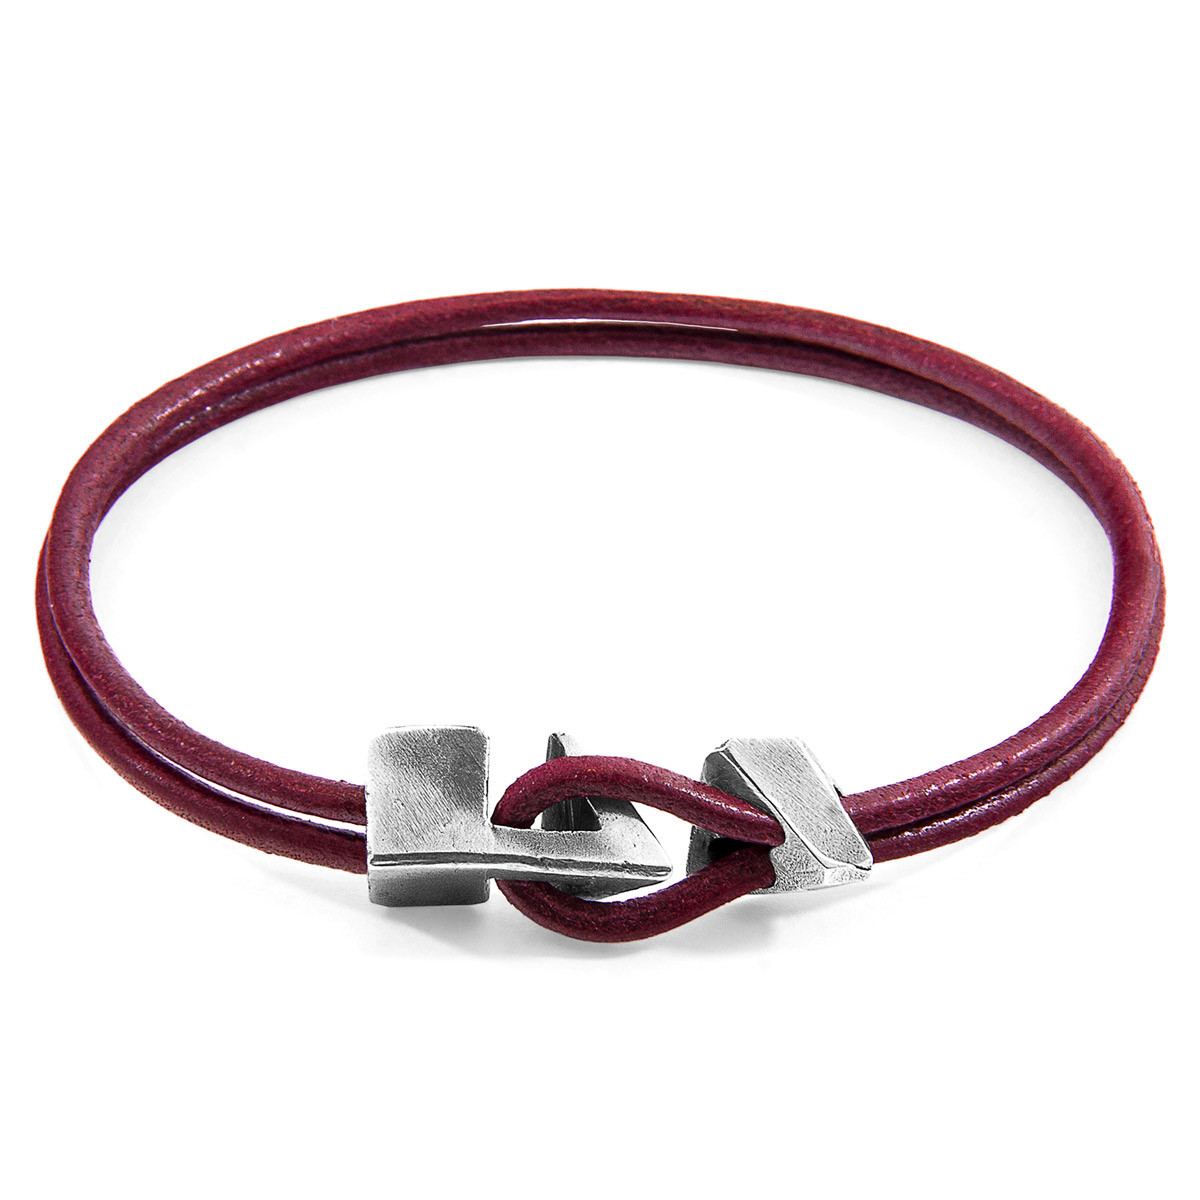 Bordeaux Red Brixham Silver and Round Leather Bracelet